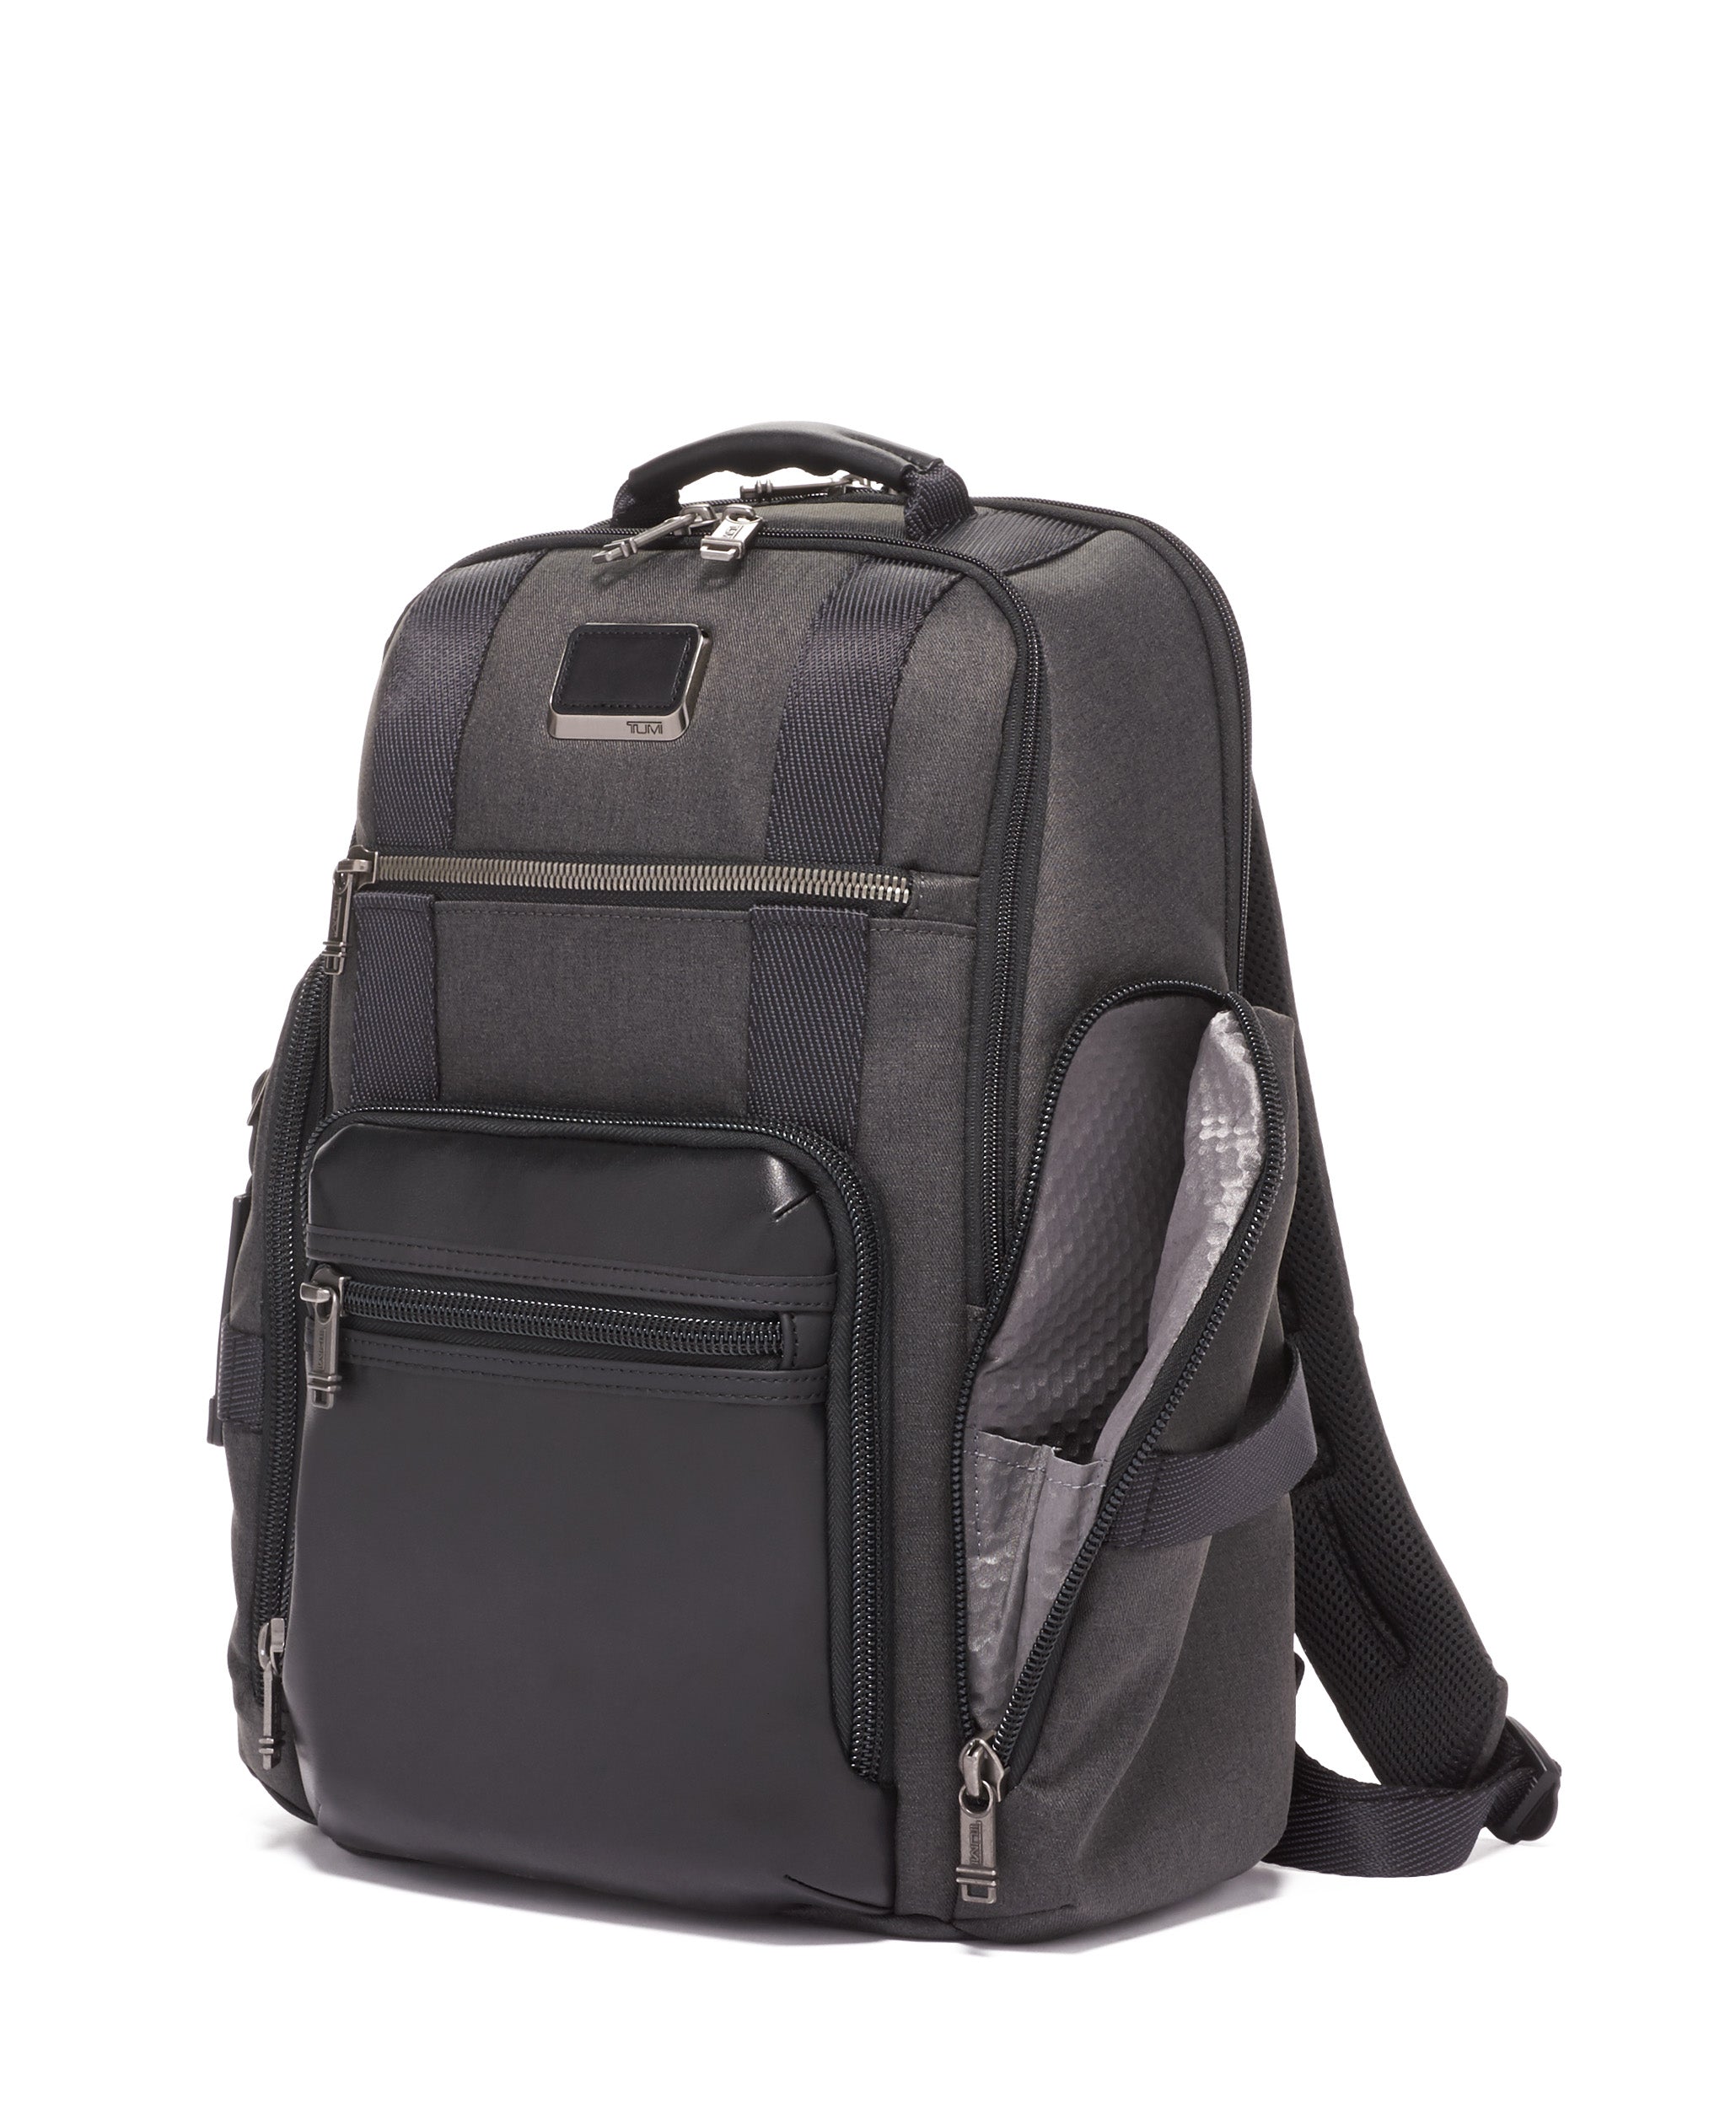 TUMI Alpha Bravo Sheppard Deluxe Backpack – Luggage Online